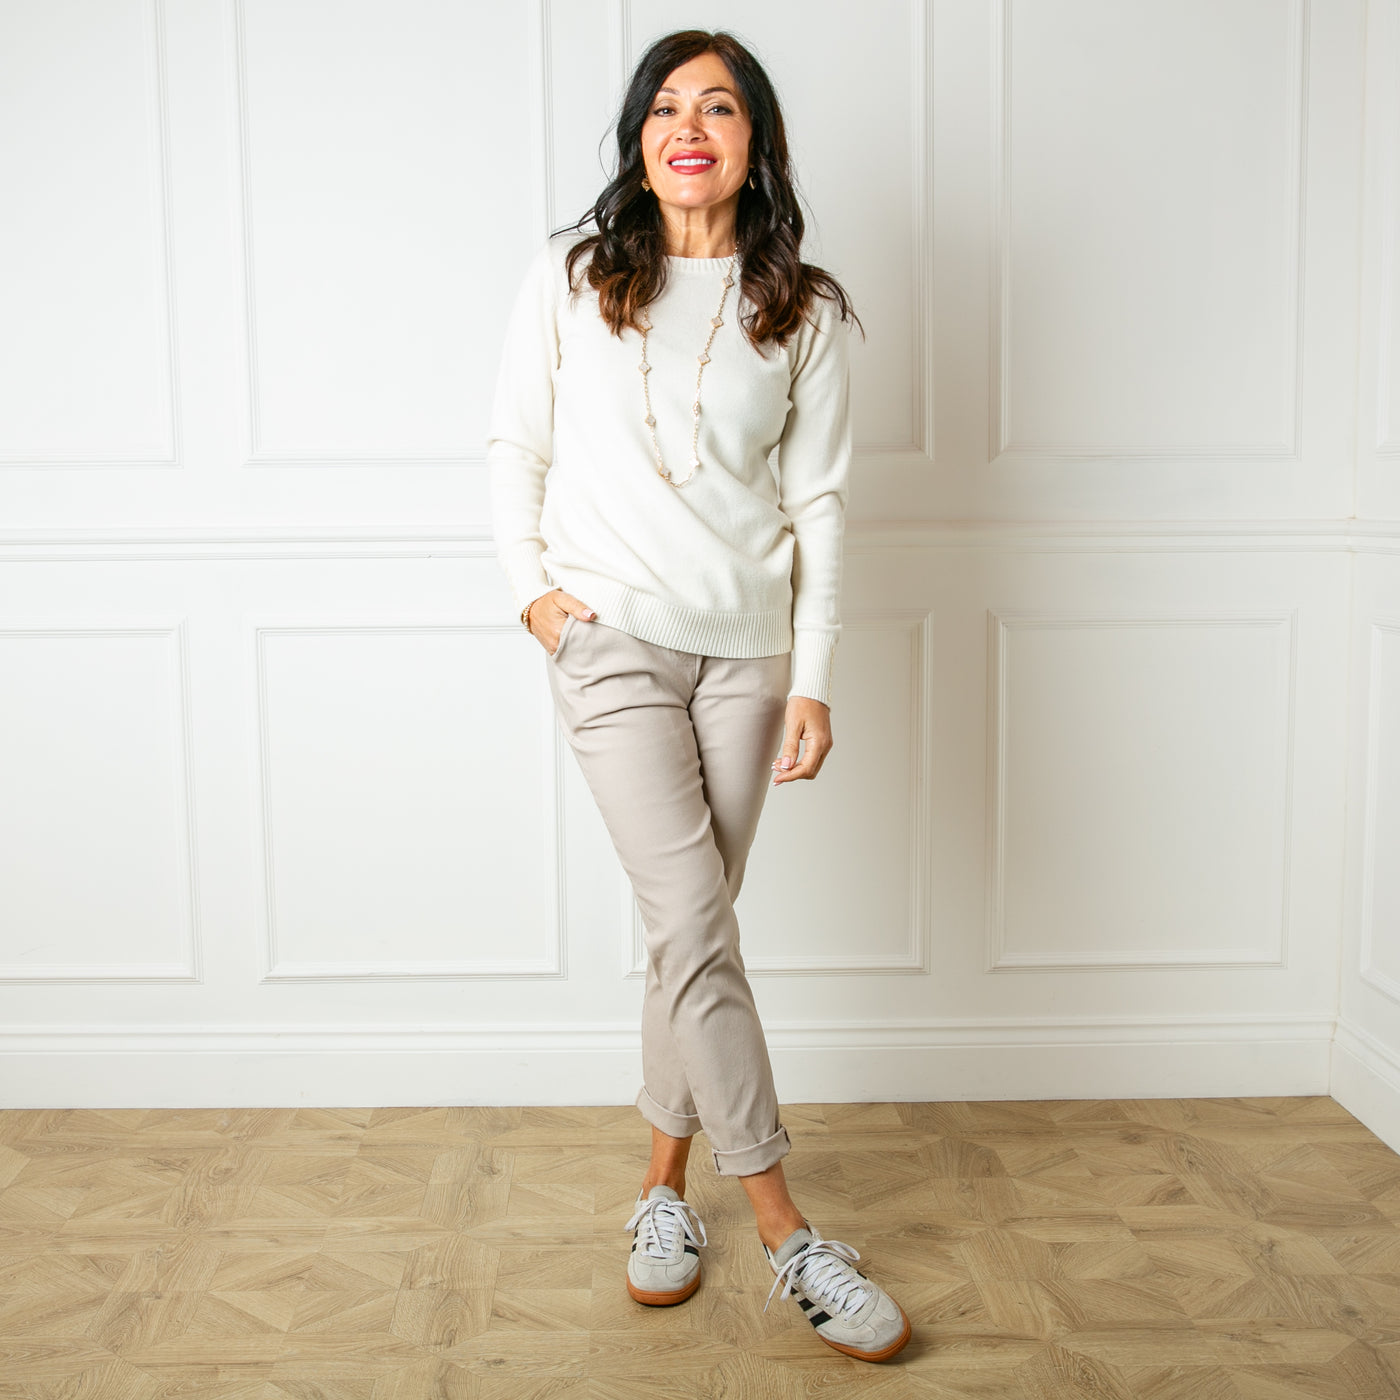 The Crew Neck Button Jumper in cream made from a fine knitted blend, super soft and great for spring